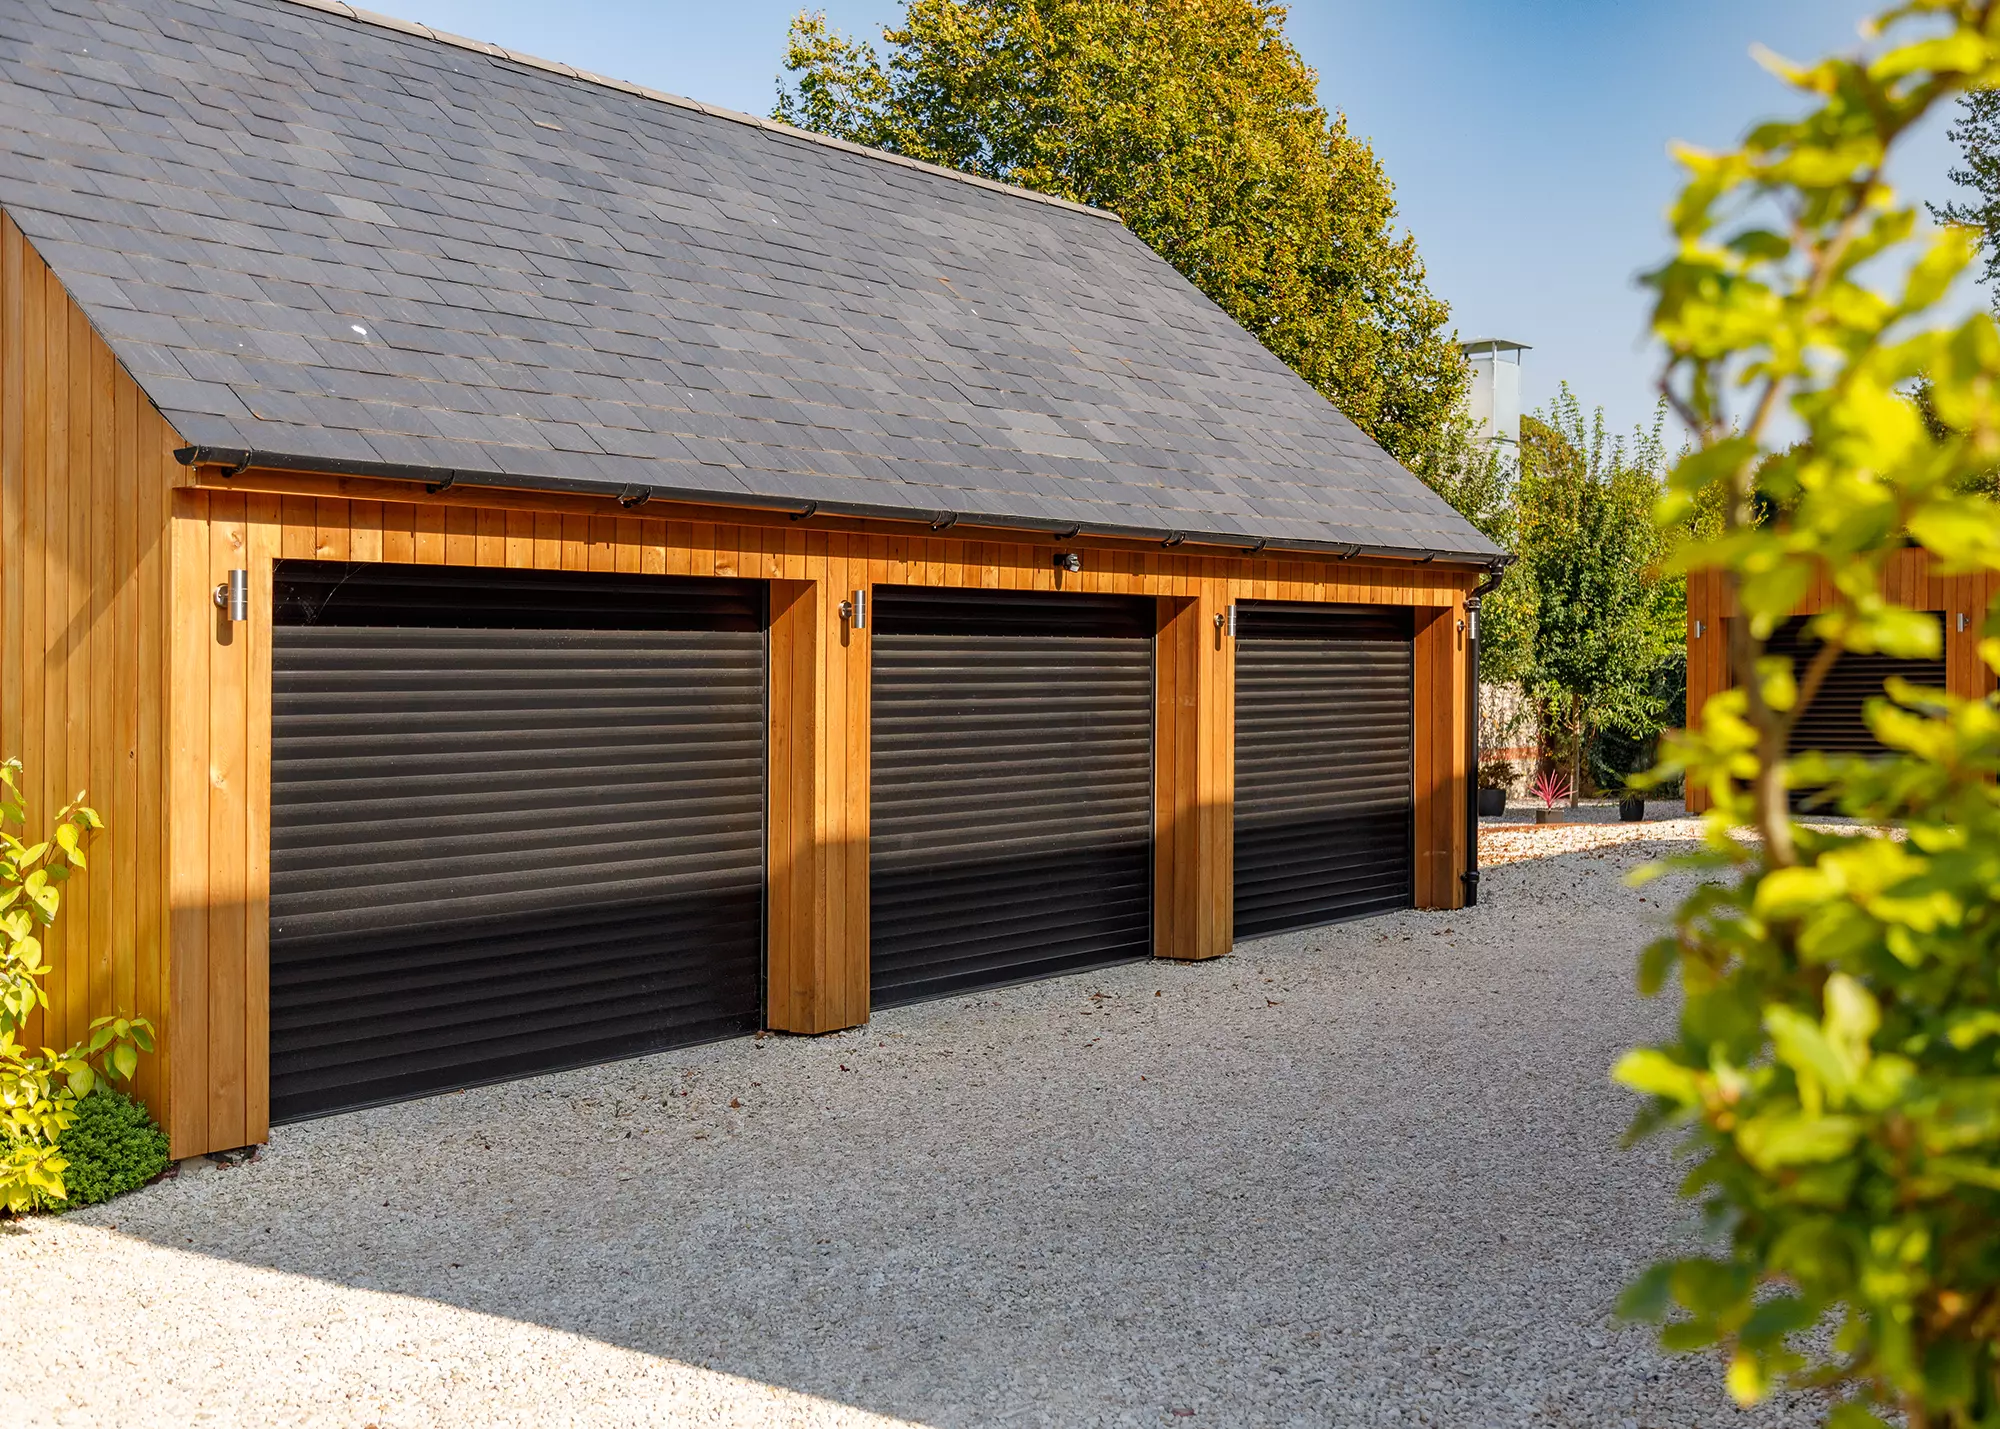 Types of Rolling Shutter Doors - The Constructor